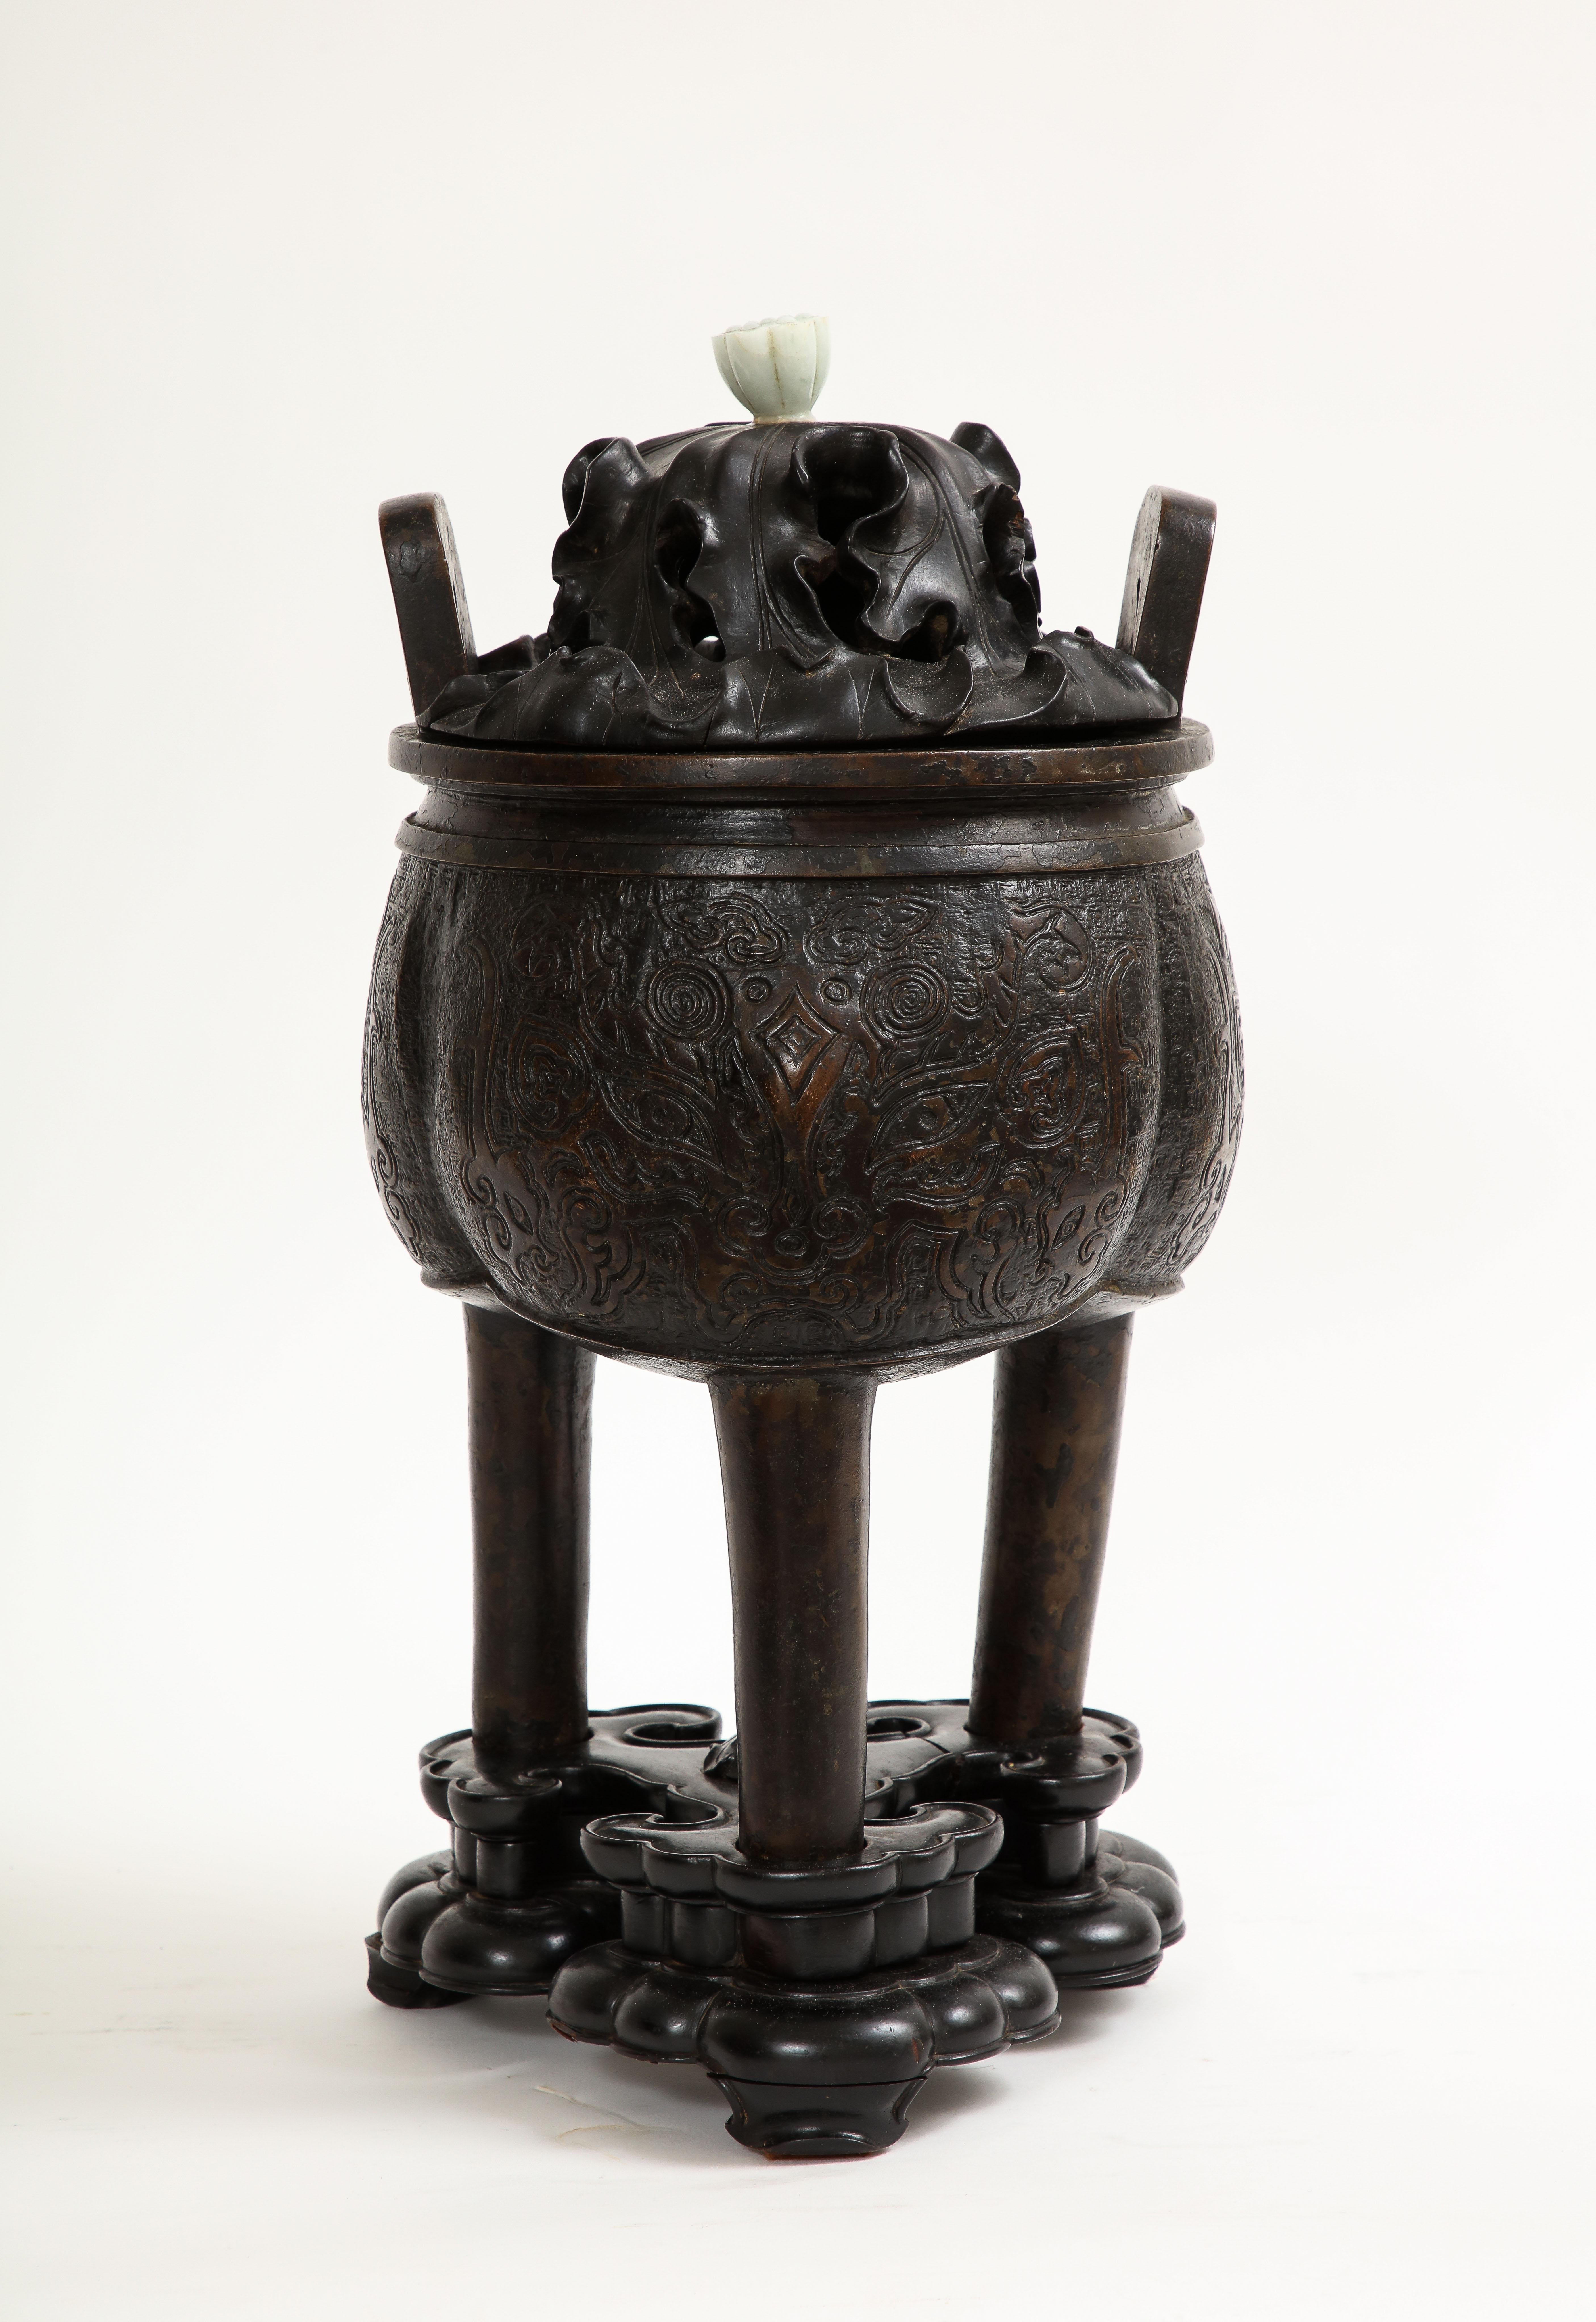 A Fantastic and Rare 17th century Chinese Patinated Bronze Censer & Cover with Jade Finial Top and Wood Base. The body of this censor is intricately decorated with Archaistic decoration in hand-chassed relief. The wooden lid is designed with a